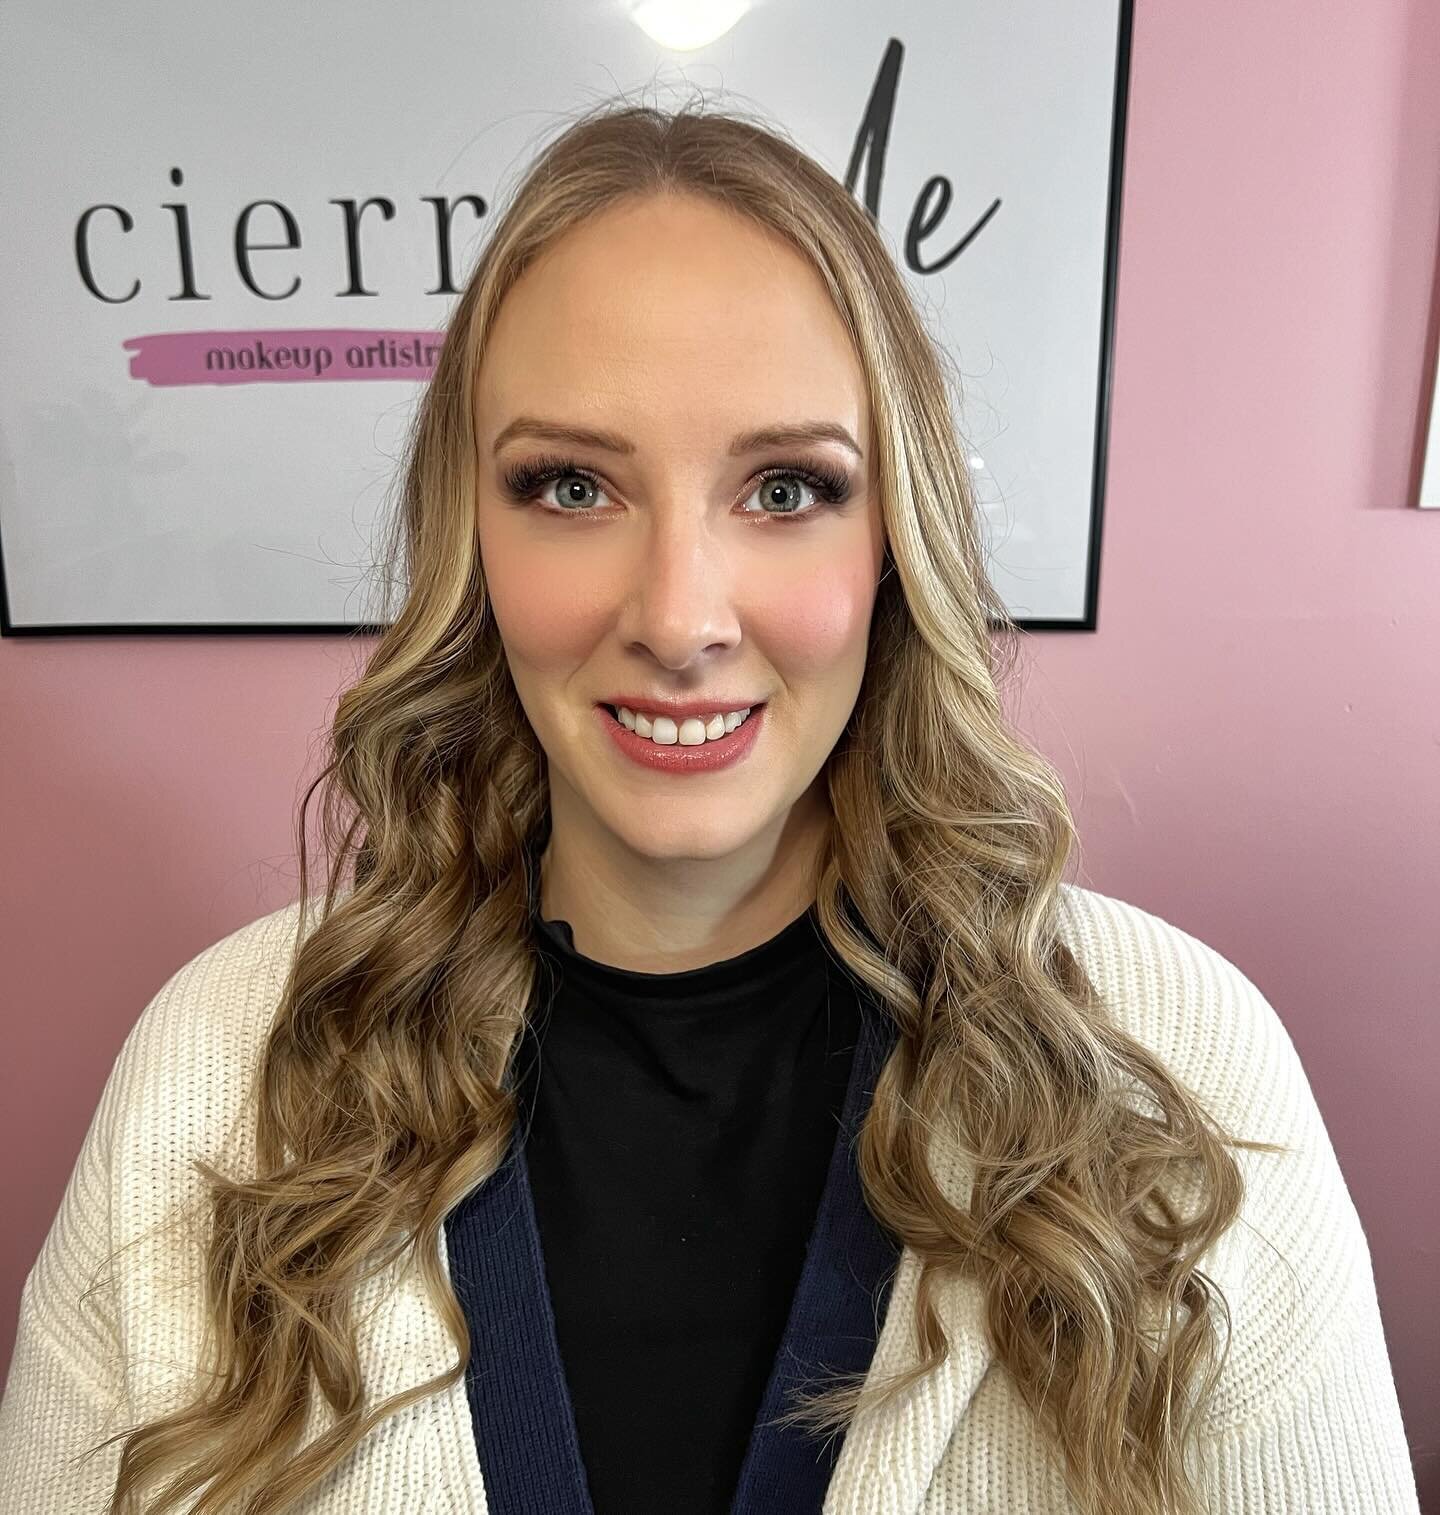 Loved this soft glam on the stunning @adventures.by.nikki ! 

I did her soft curls as well - I offer hair curling as an add on service if interested!
.
.
.
#yxe #saskatoon #yxemakeup #yxebeauty #saskatoonmakeupartist #yxemua #yxelocal